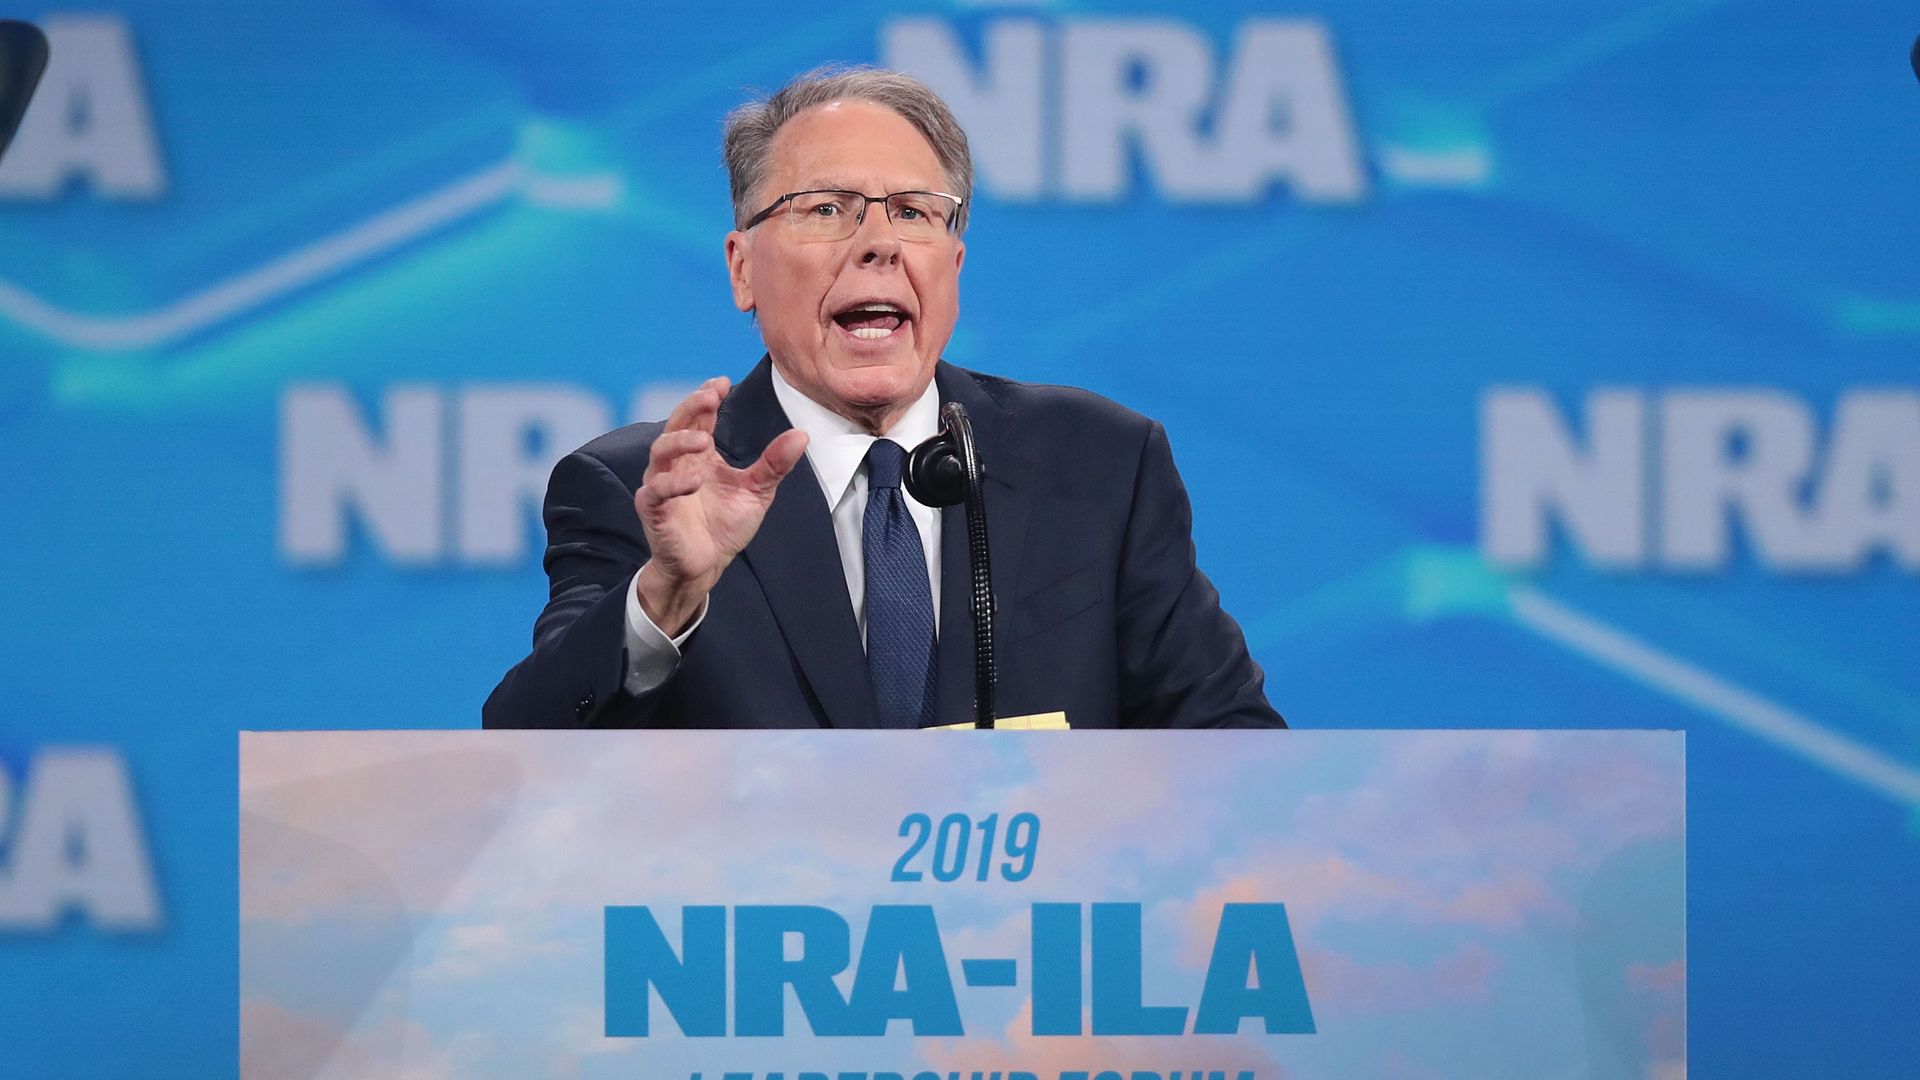  Wayne LaPierre, NRA vice president and CEO, speaks to guests at the NRA-ILA Leadership Forum at the 148th NRA Annual Meetings & Exhibits on April 26